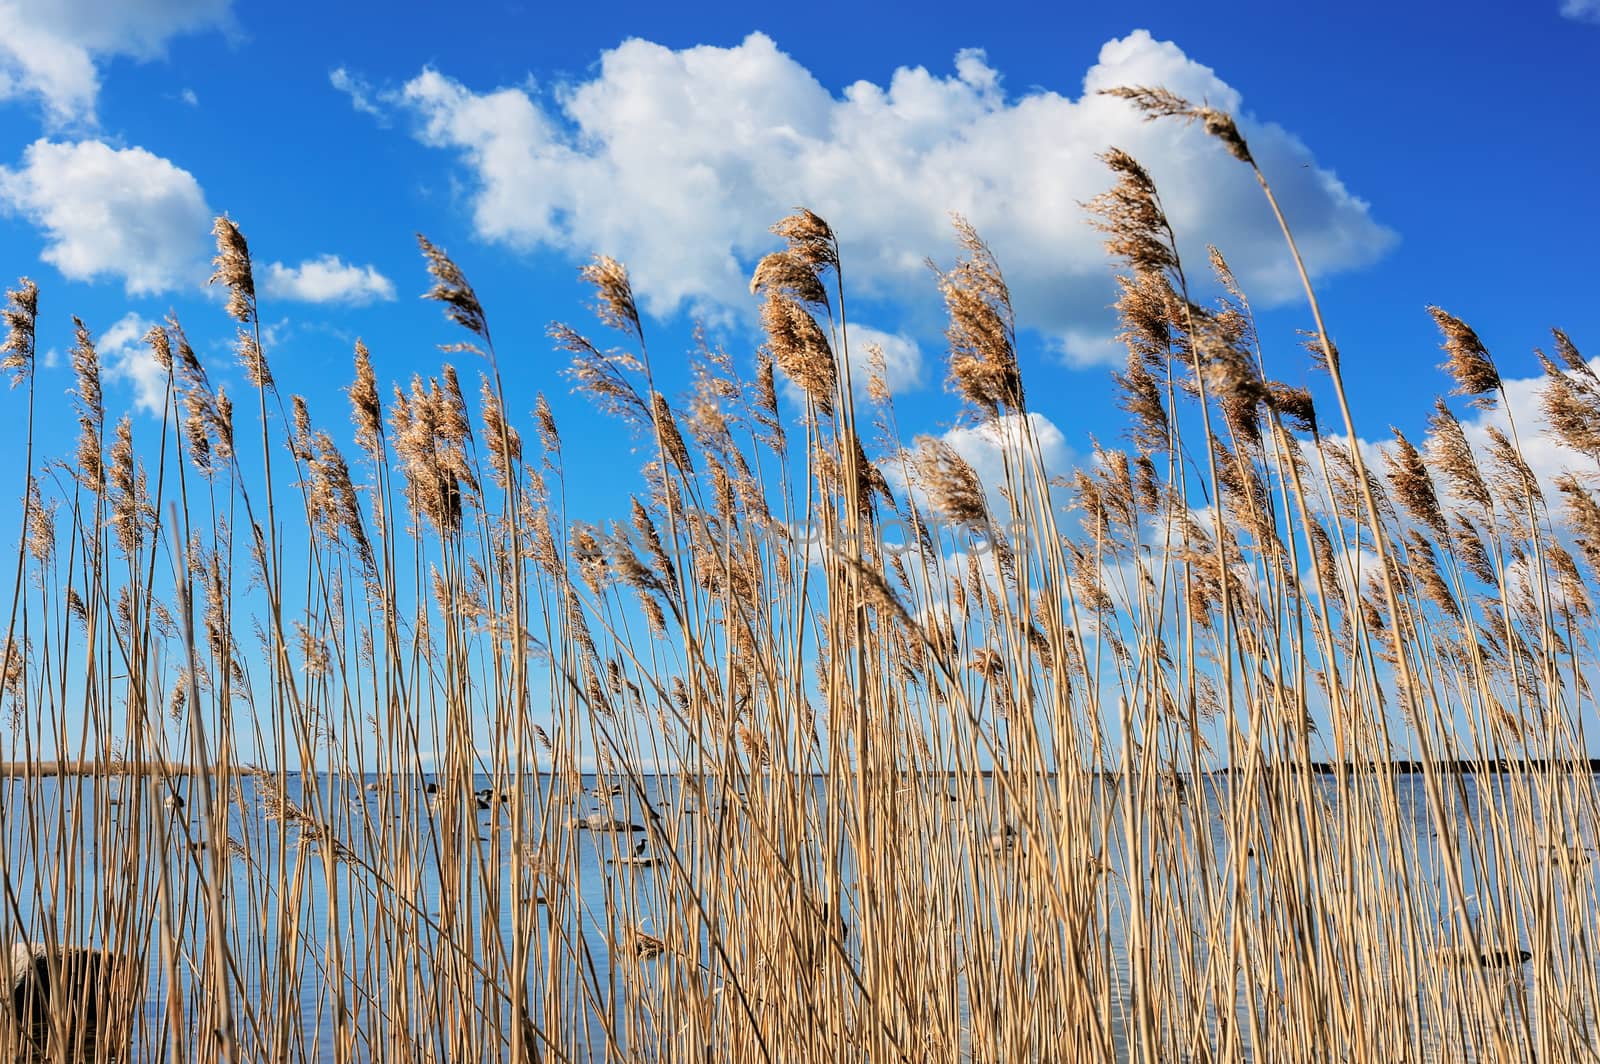 Reeds at the sea by styf22